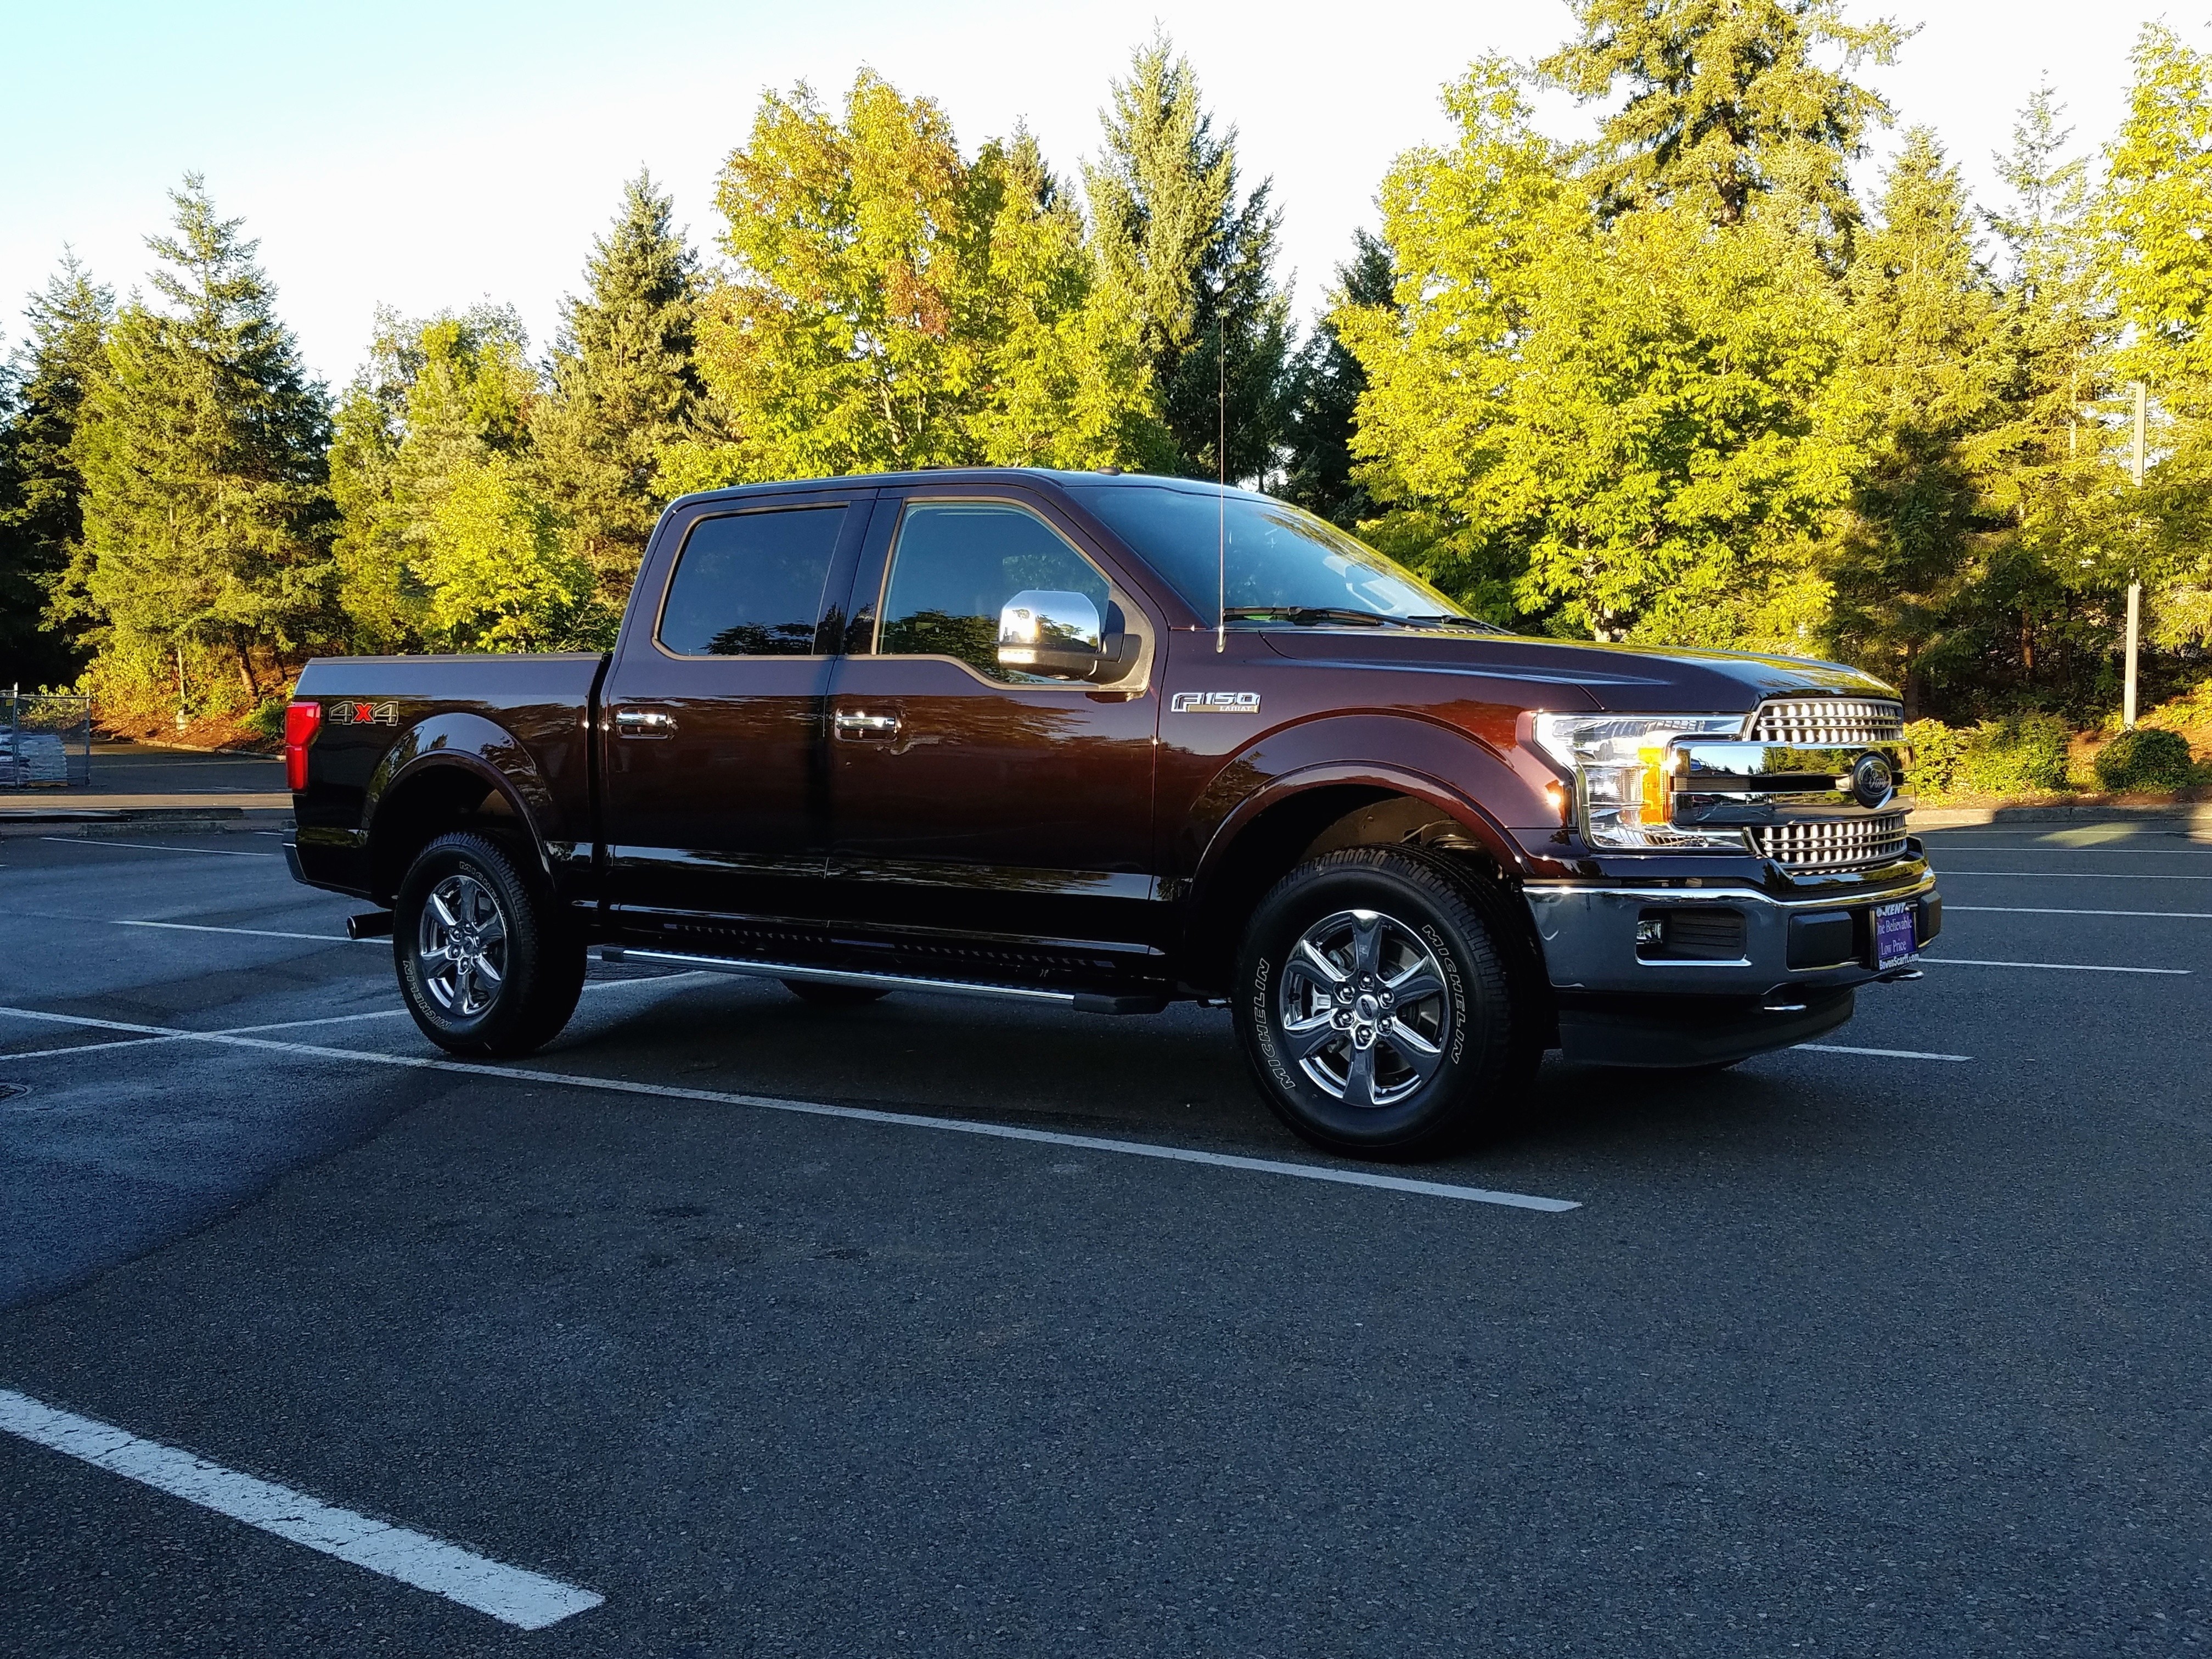 2016 ford F150 Lovely Image ford F150 forum Finally Back In A F150 2017 Platinum ford